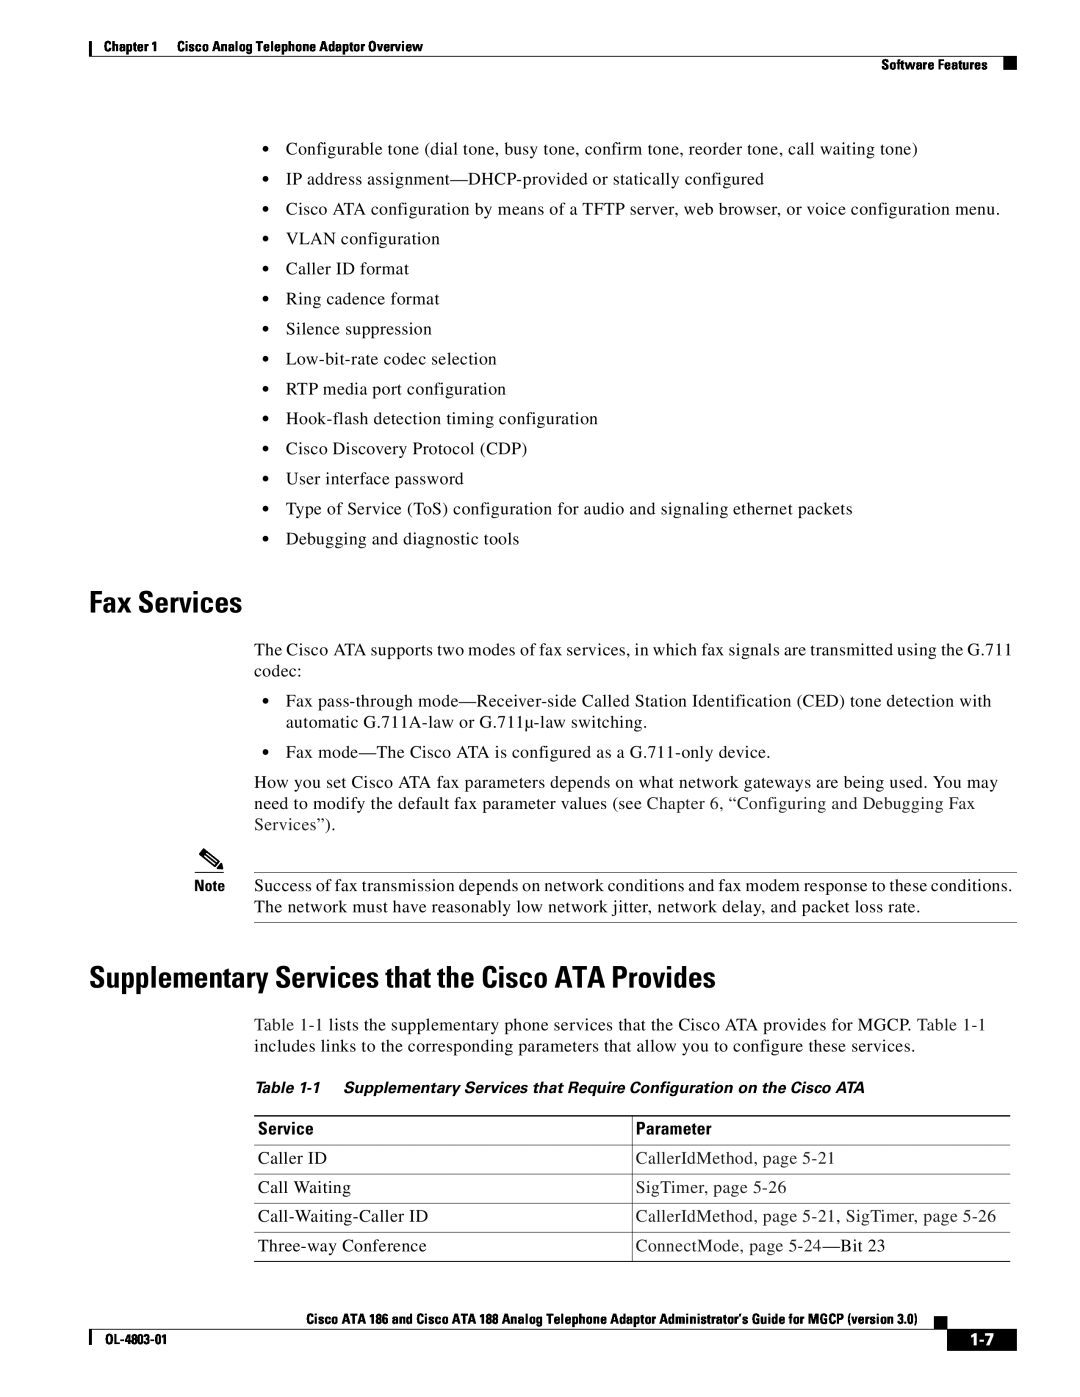 Cisco Systems ATA 188 Fax Services, Supplementary Services that the Cisco ATA Provides, Parameter, CallerIdMethod, page 